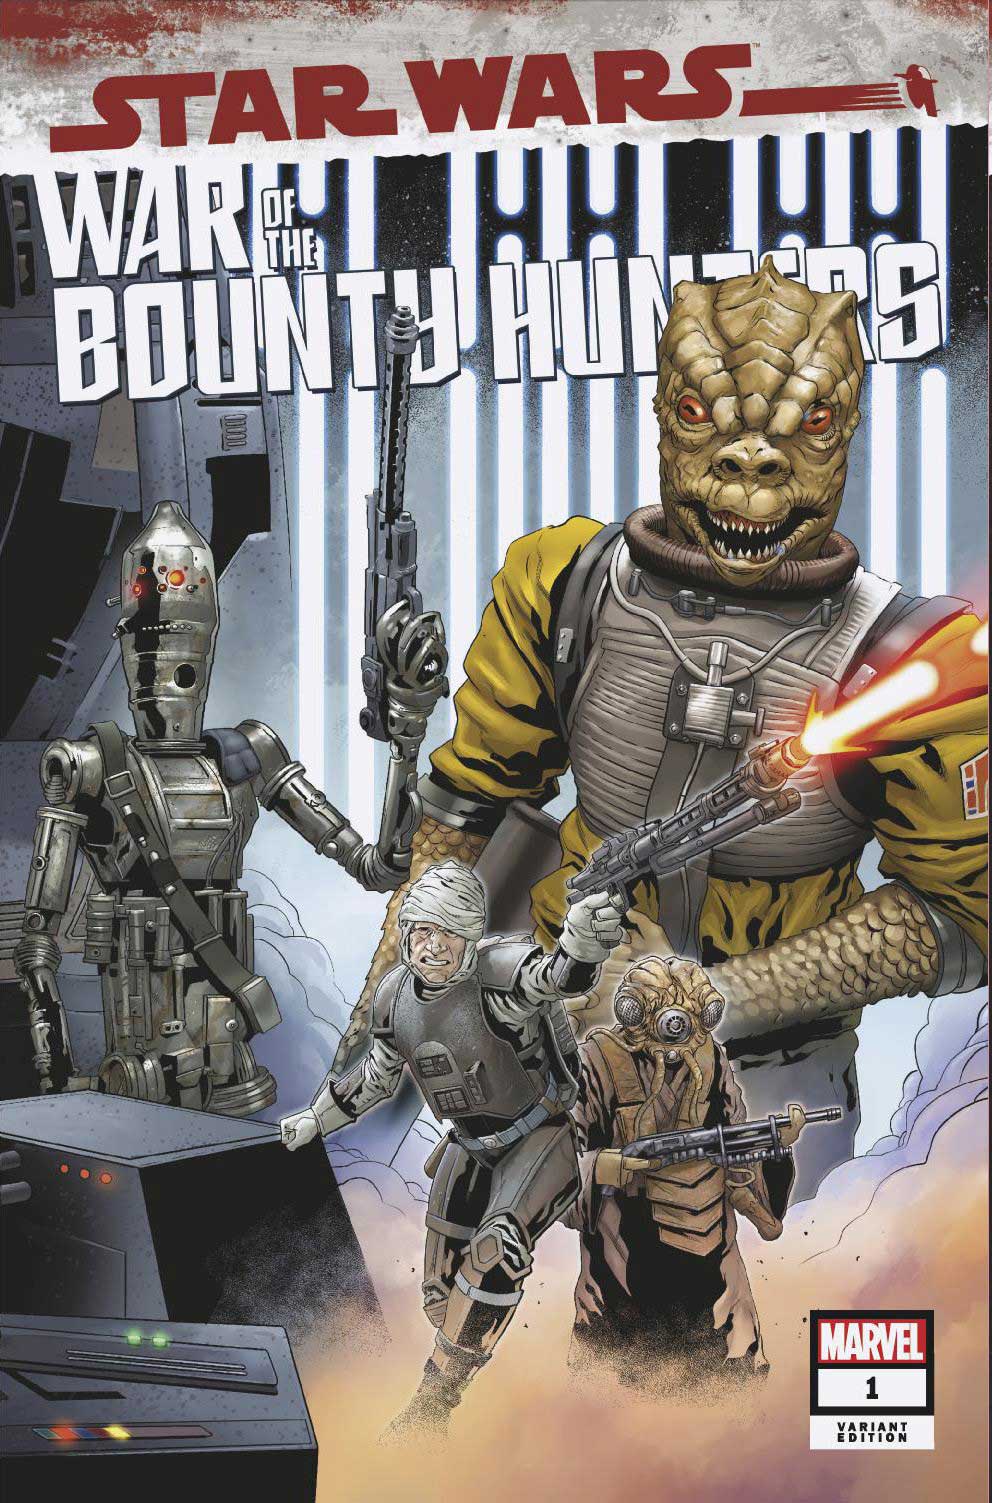 Star Wars War of the Bounty Hunters #1 (Jetpack Comics Will Sliney Limited Exclusive Variant)